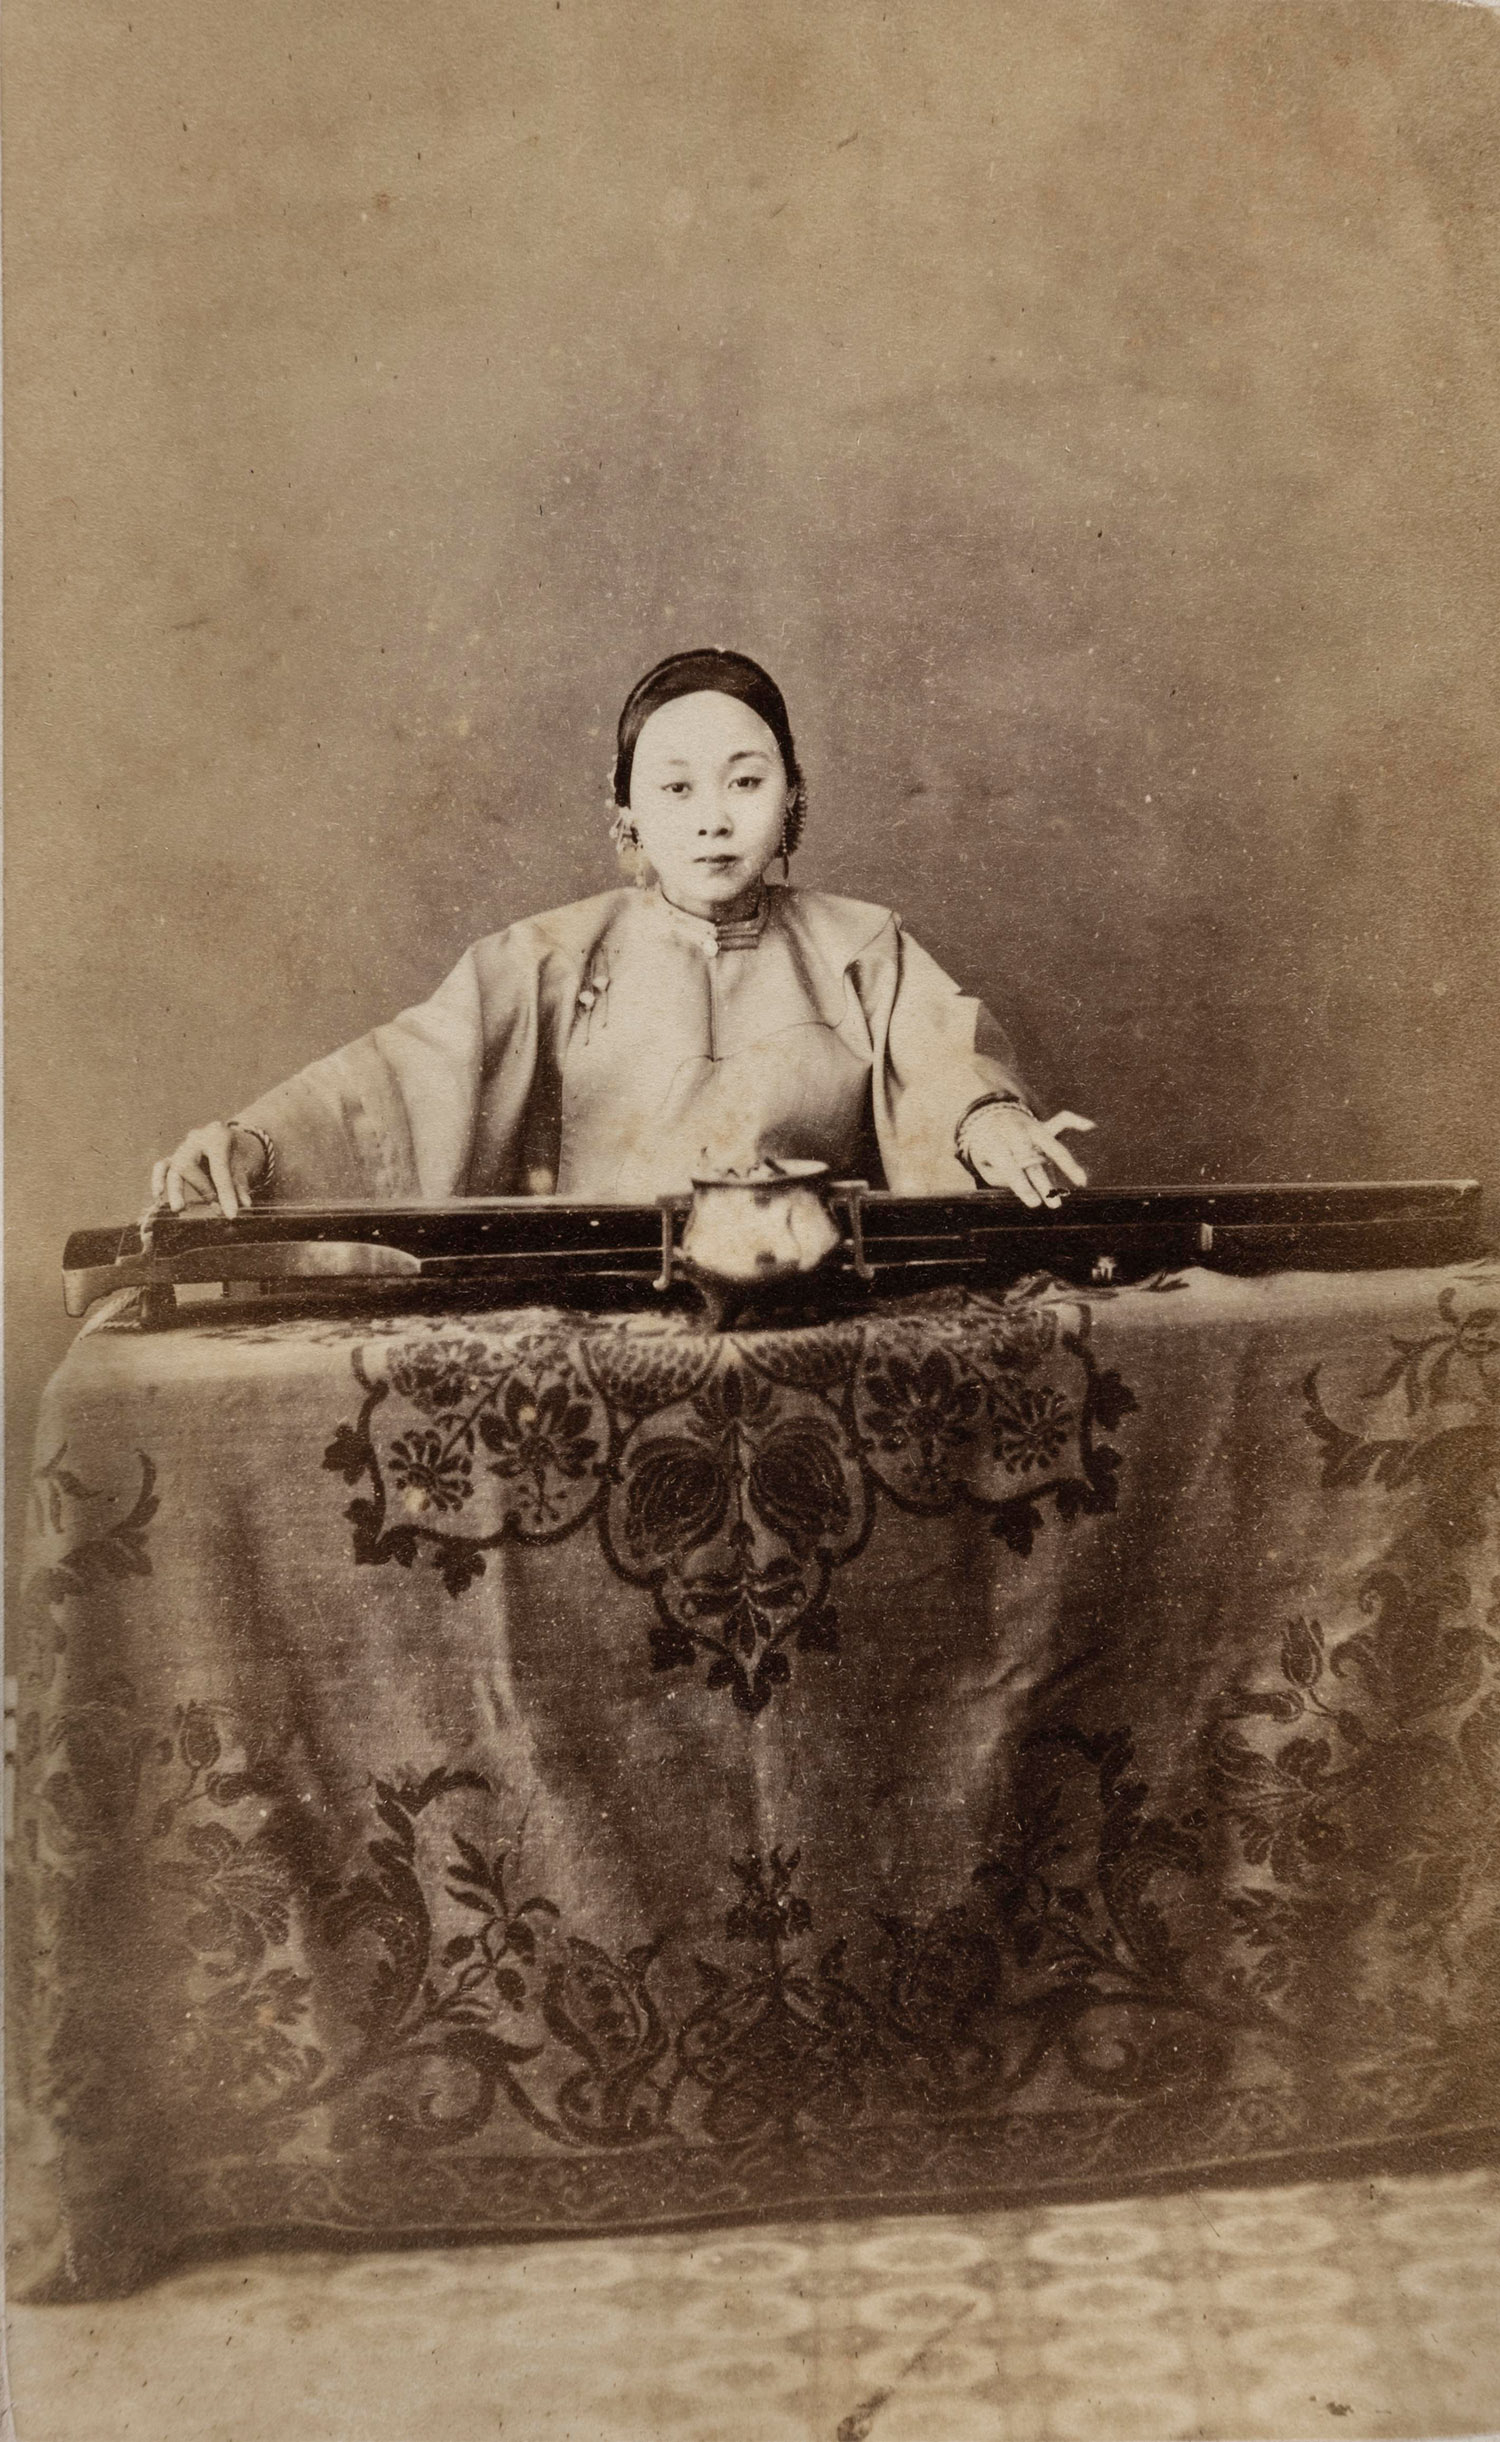  -  - Seizing Shadows: Rare Photographs by late Qing Dynasty Masters